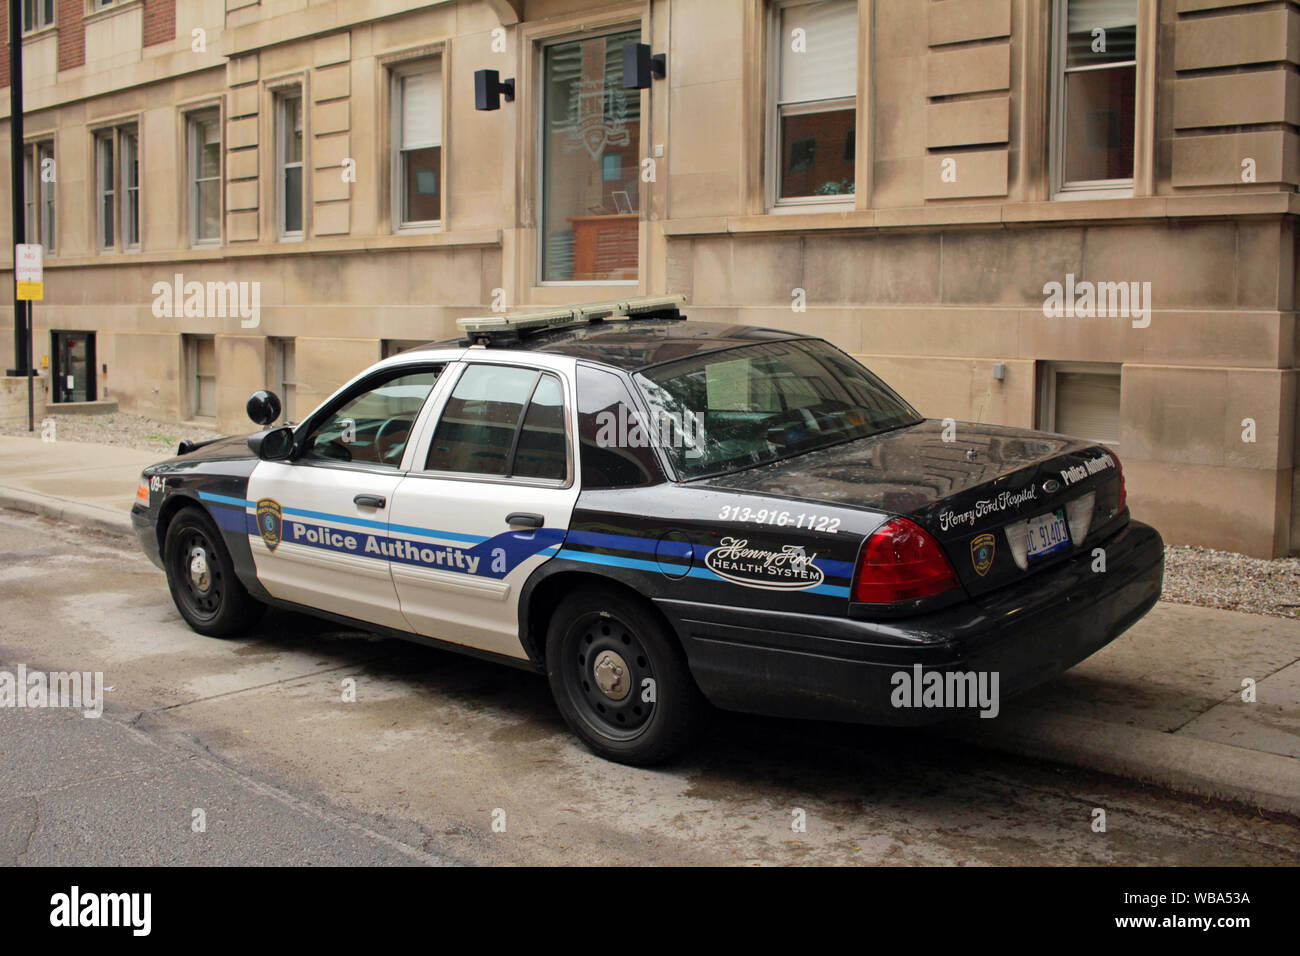 Henry Ford Hospital Police Authority vehicle, Henry Ford Hospital, Detroit, Michigan, USA Stock Photo